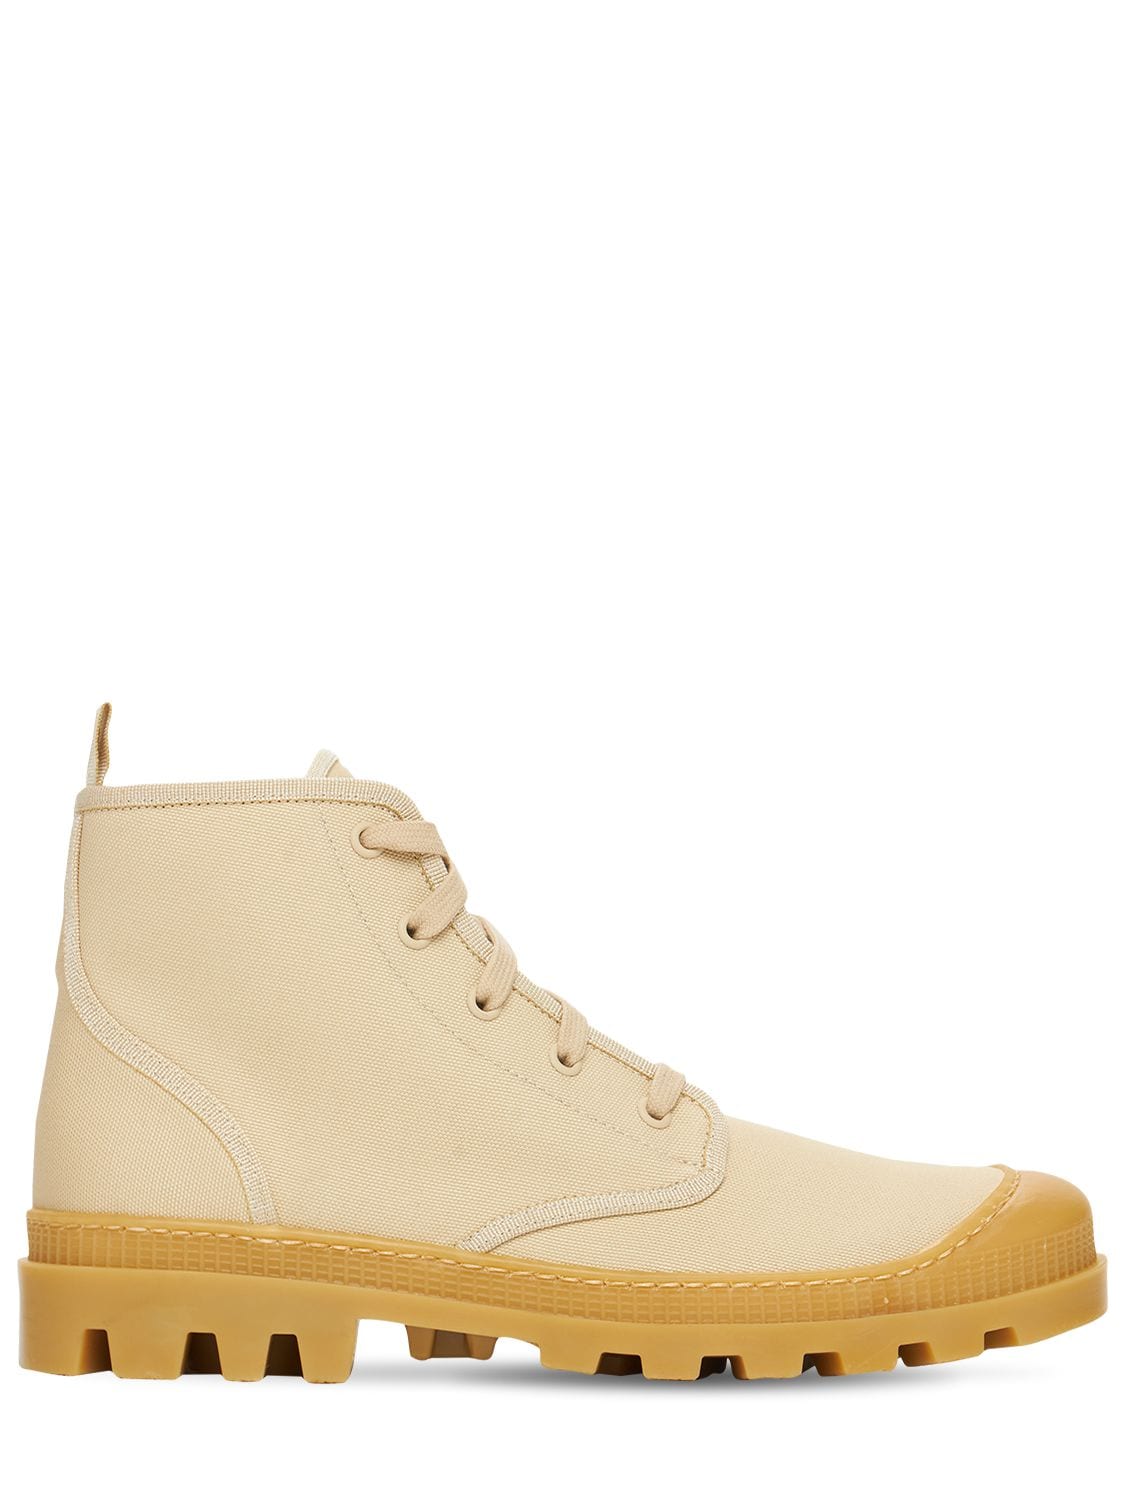 GIA X PERNILLE TEISBAEK 20mm Cotton Canvas Combat Boots